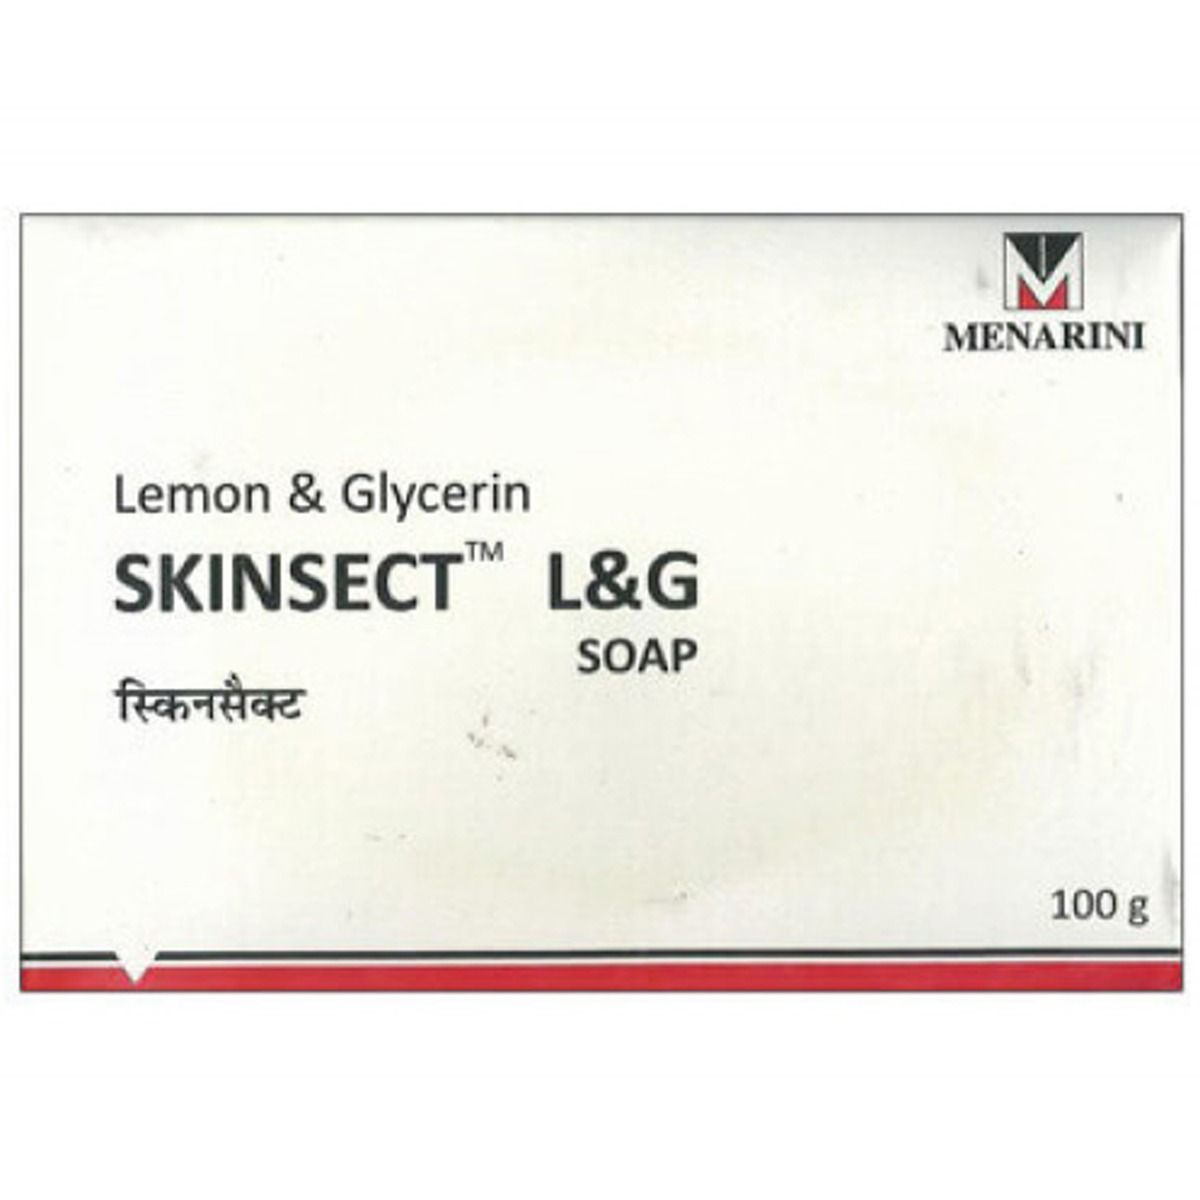 Buy Skinsect L&G Soap, 100 gm Online